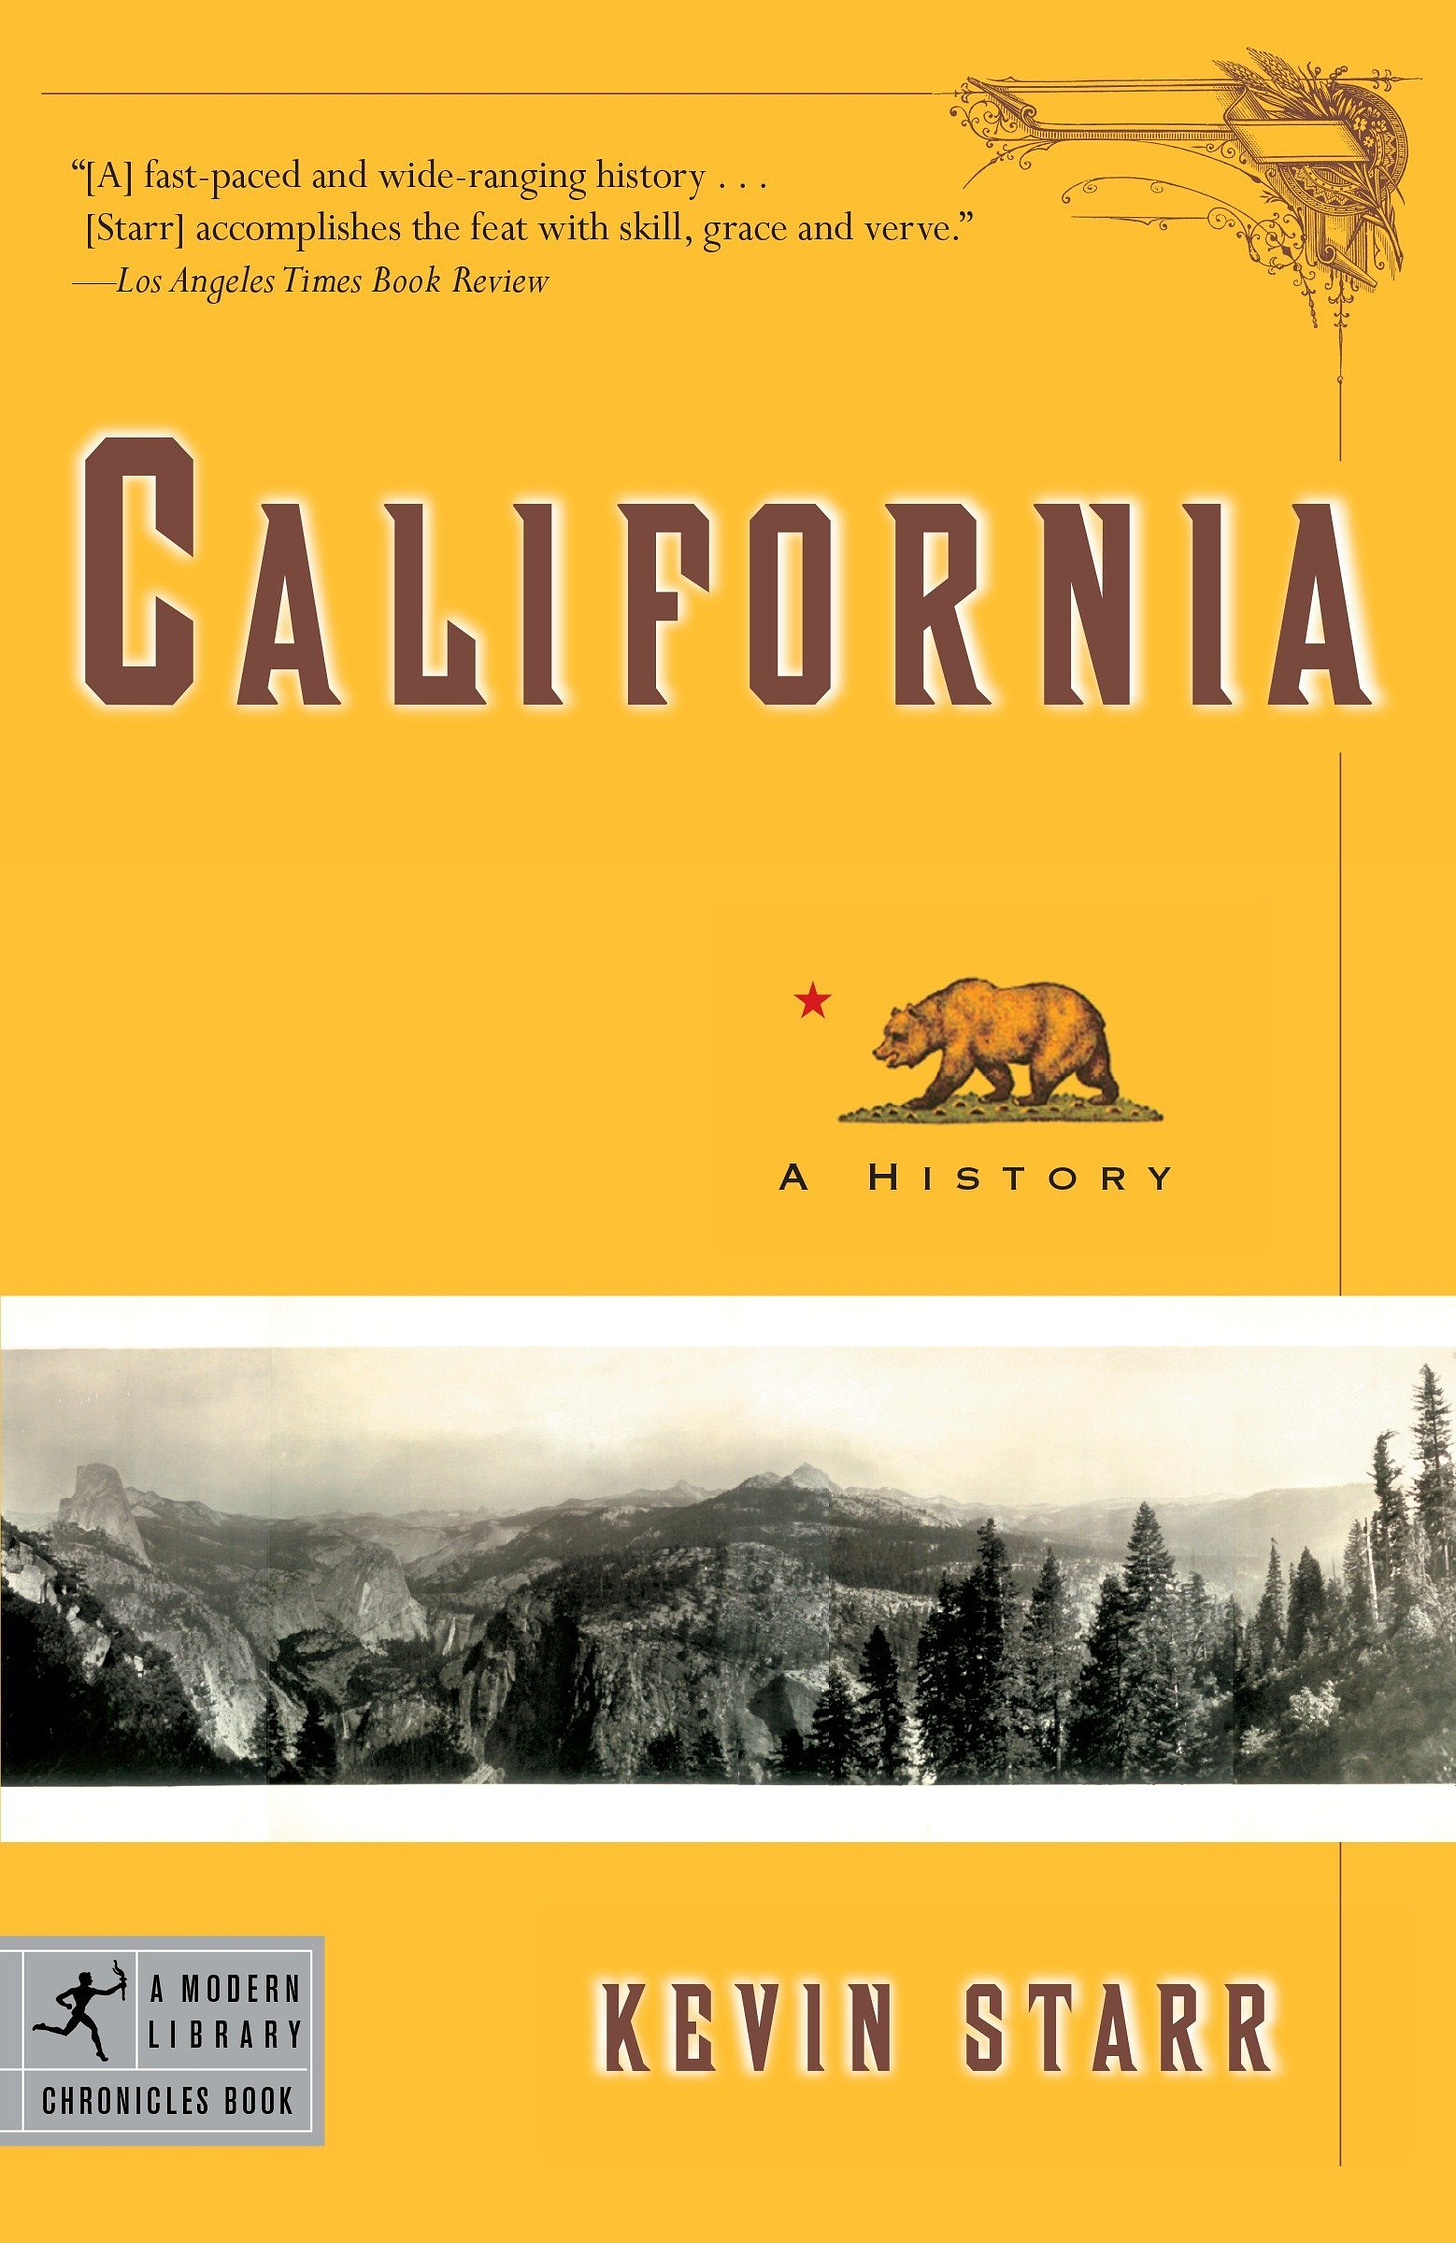 California: A History (Modern Library Chronicles): Starr, Kevin:  8589897985260: Amazon.com: Books